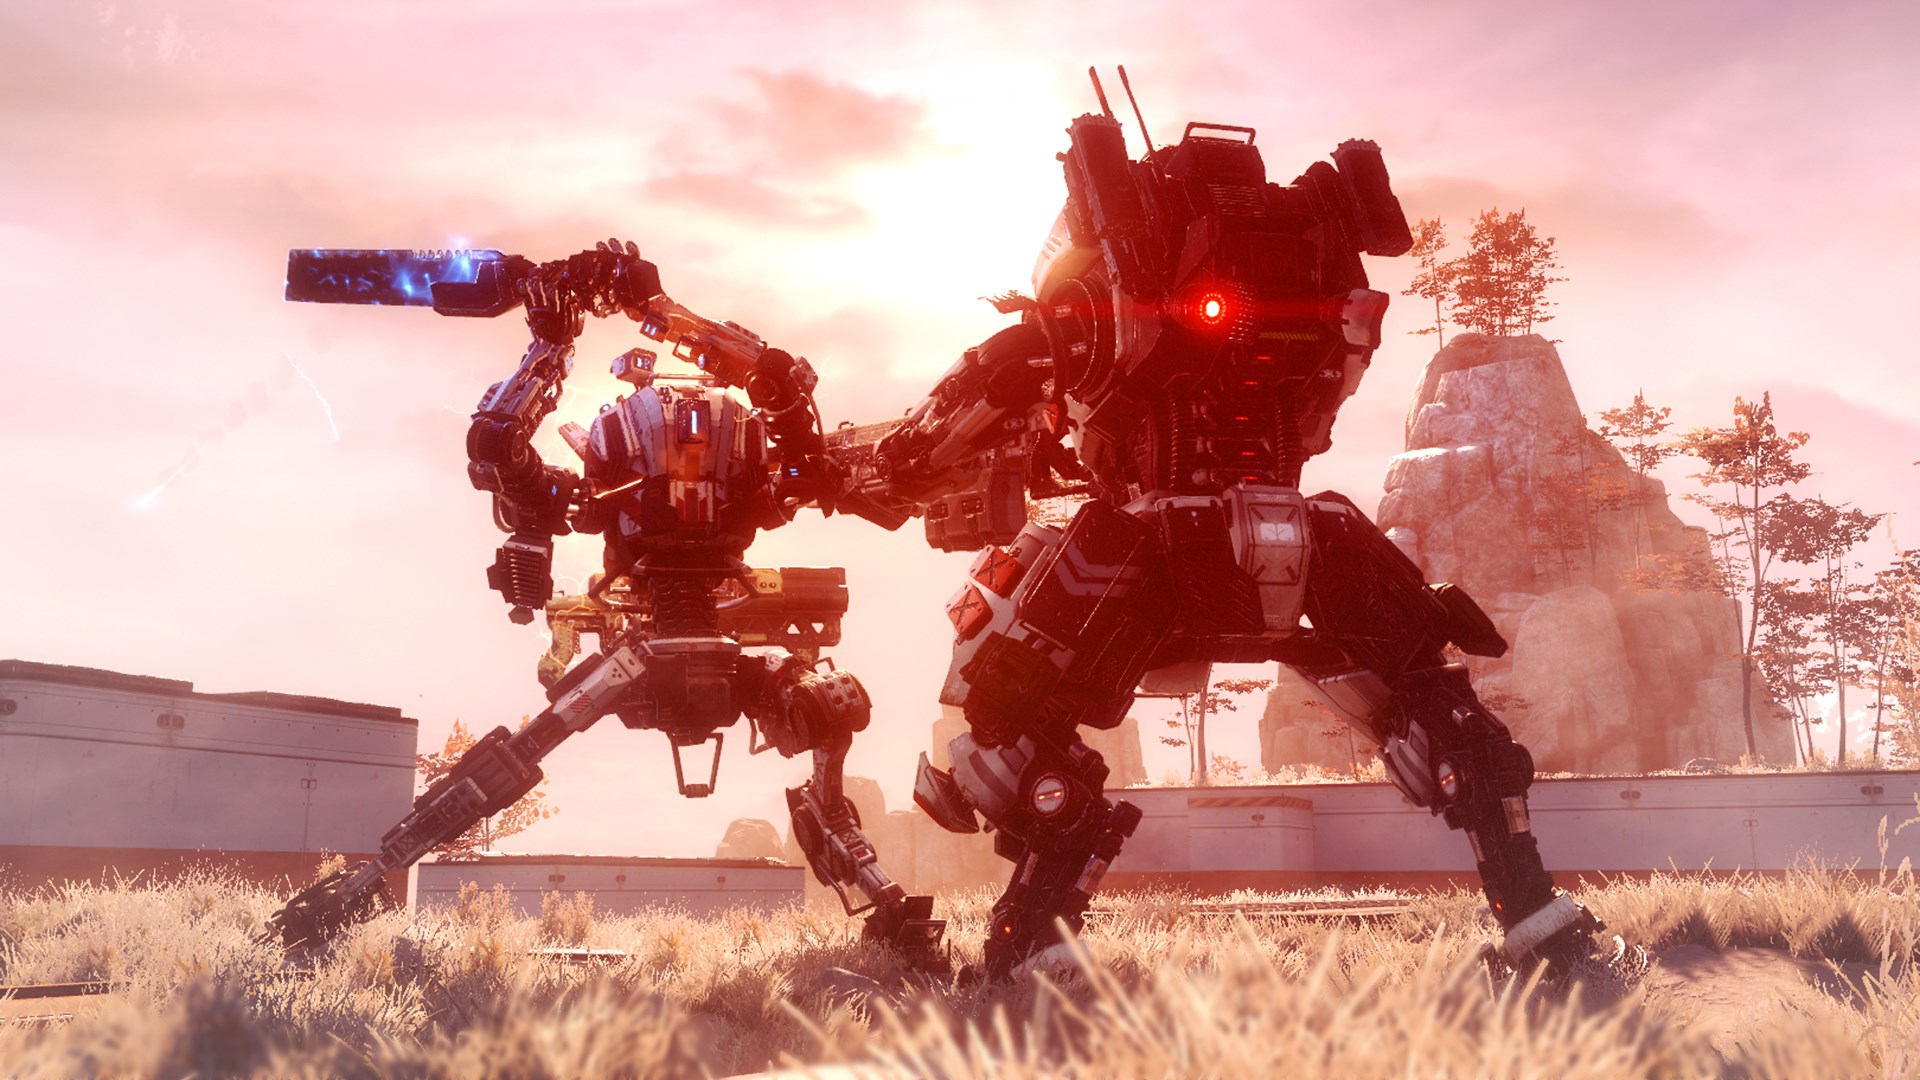 Titanfall 3 Was in Development For Almost an Entire Year Before Apex Legends – Game Designer